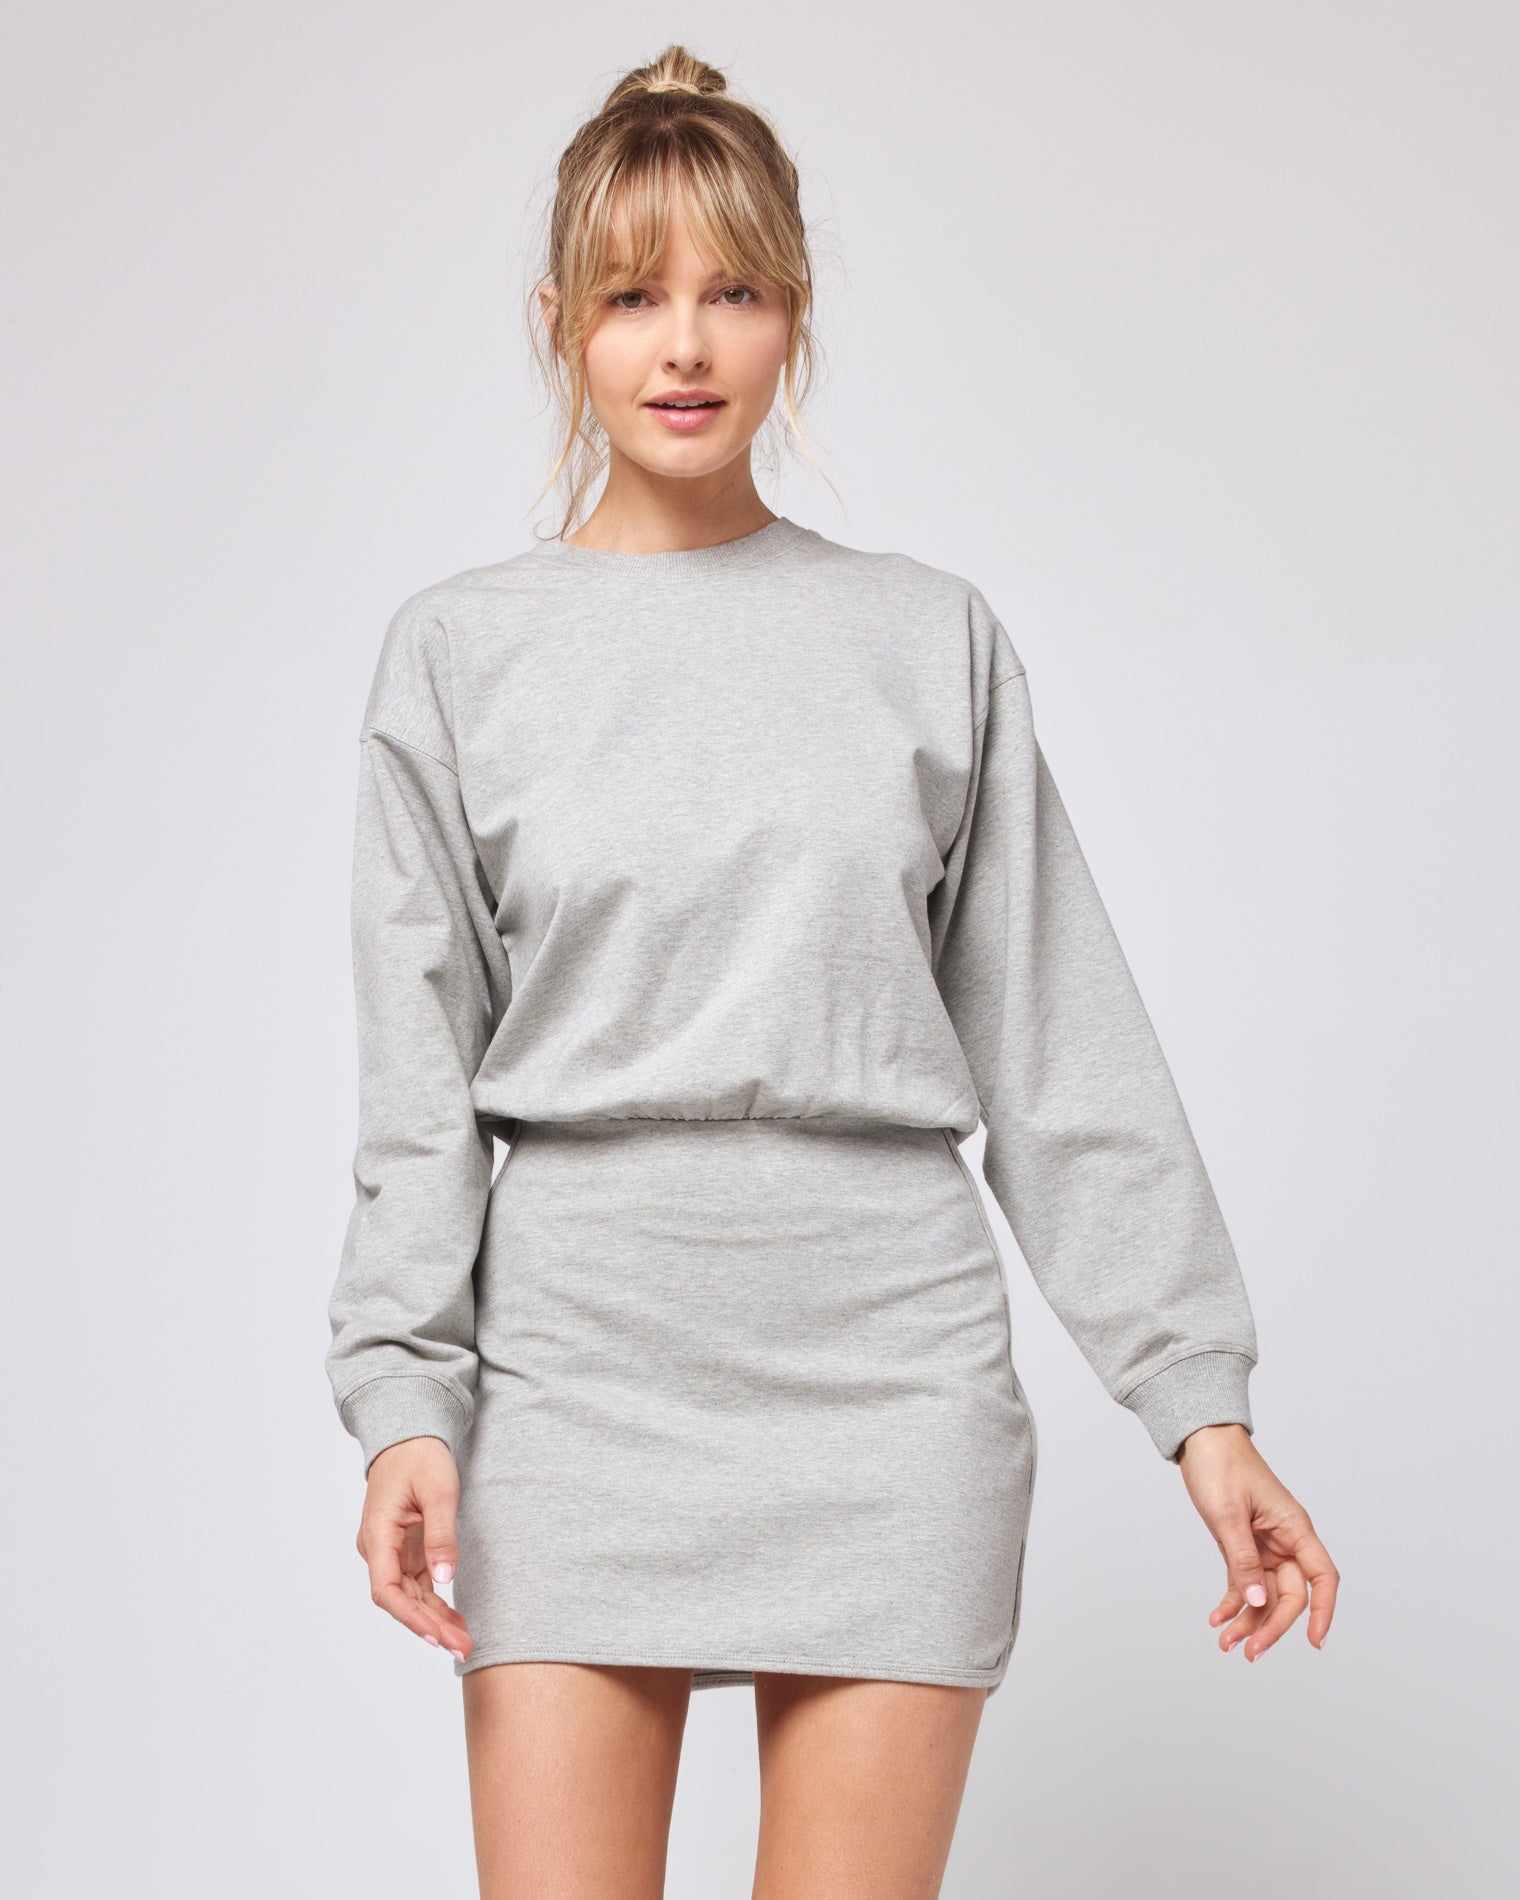 Groove Dress - Heather Grey Heather Grey | Model: Lura (size: S) | Hover